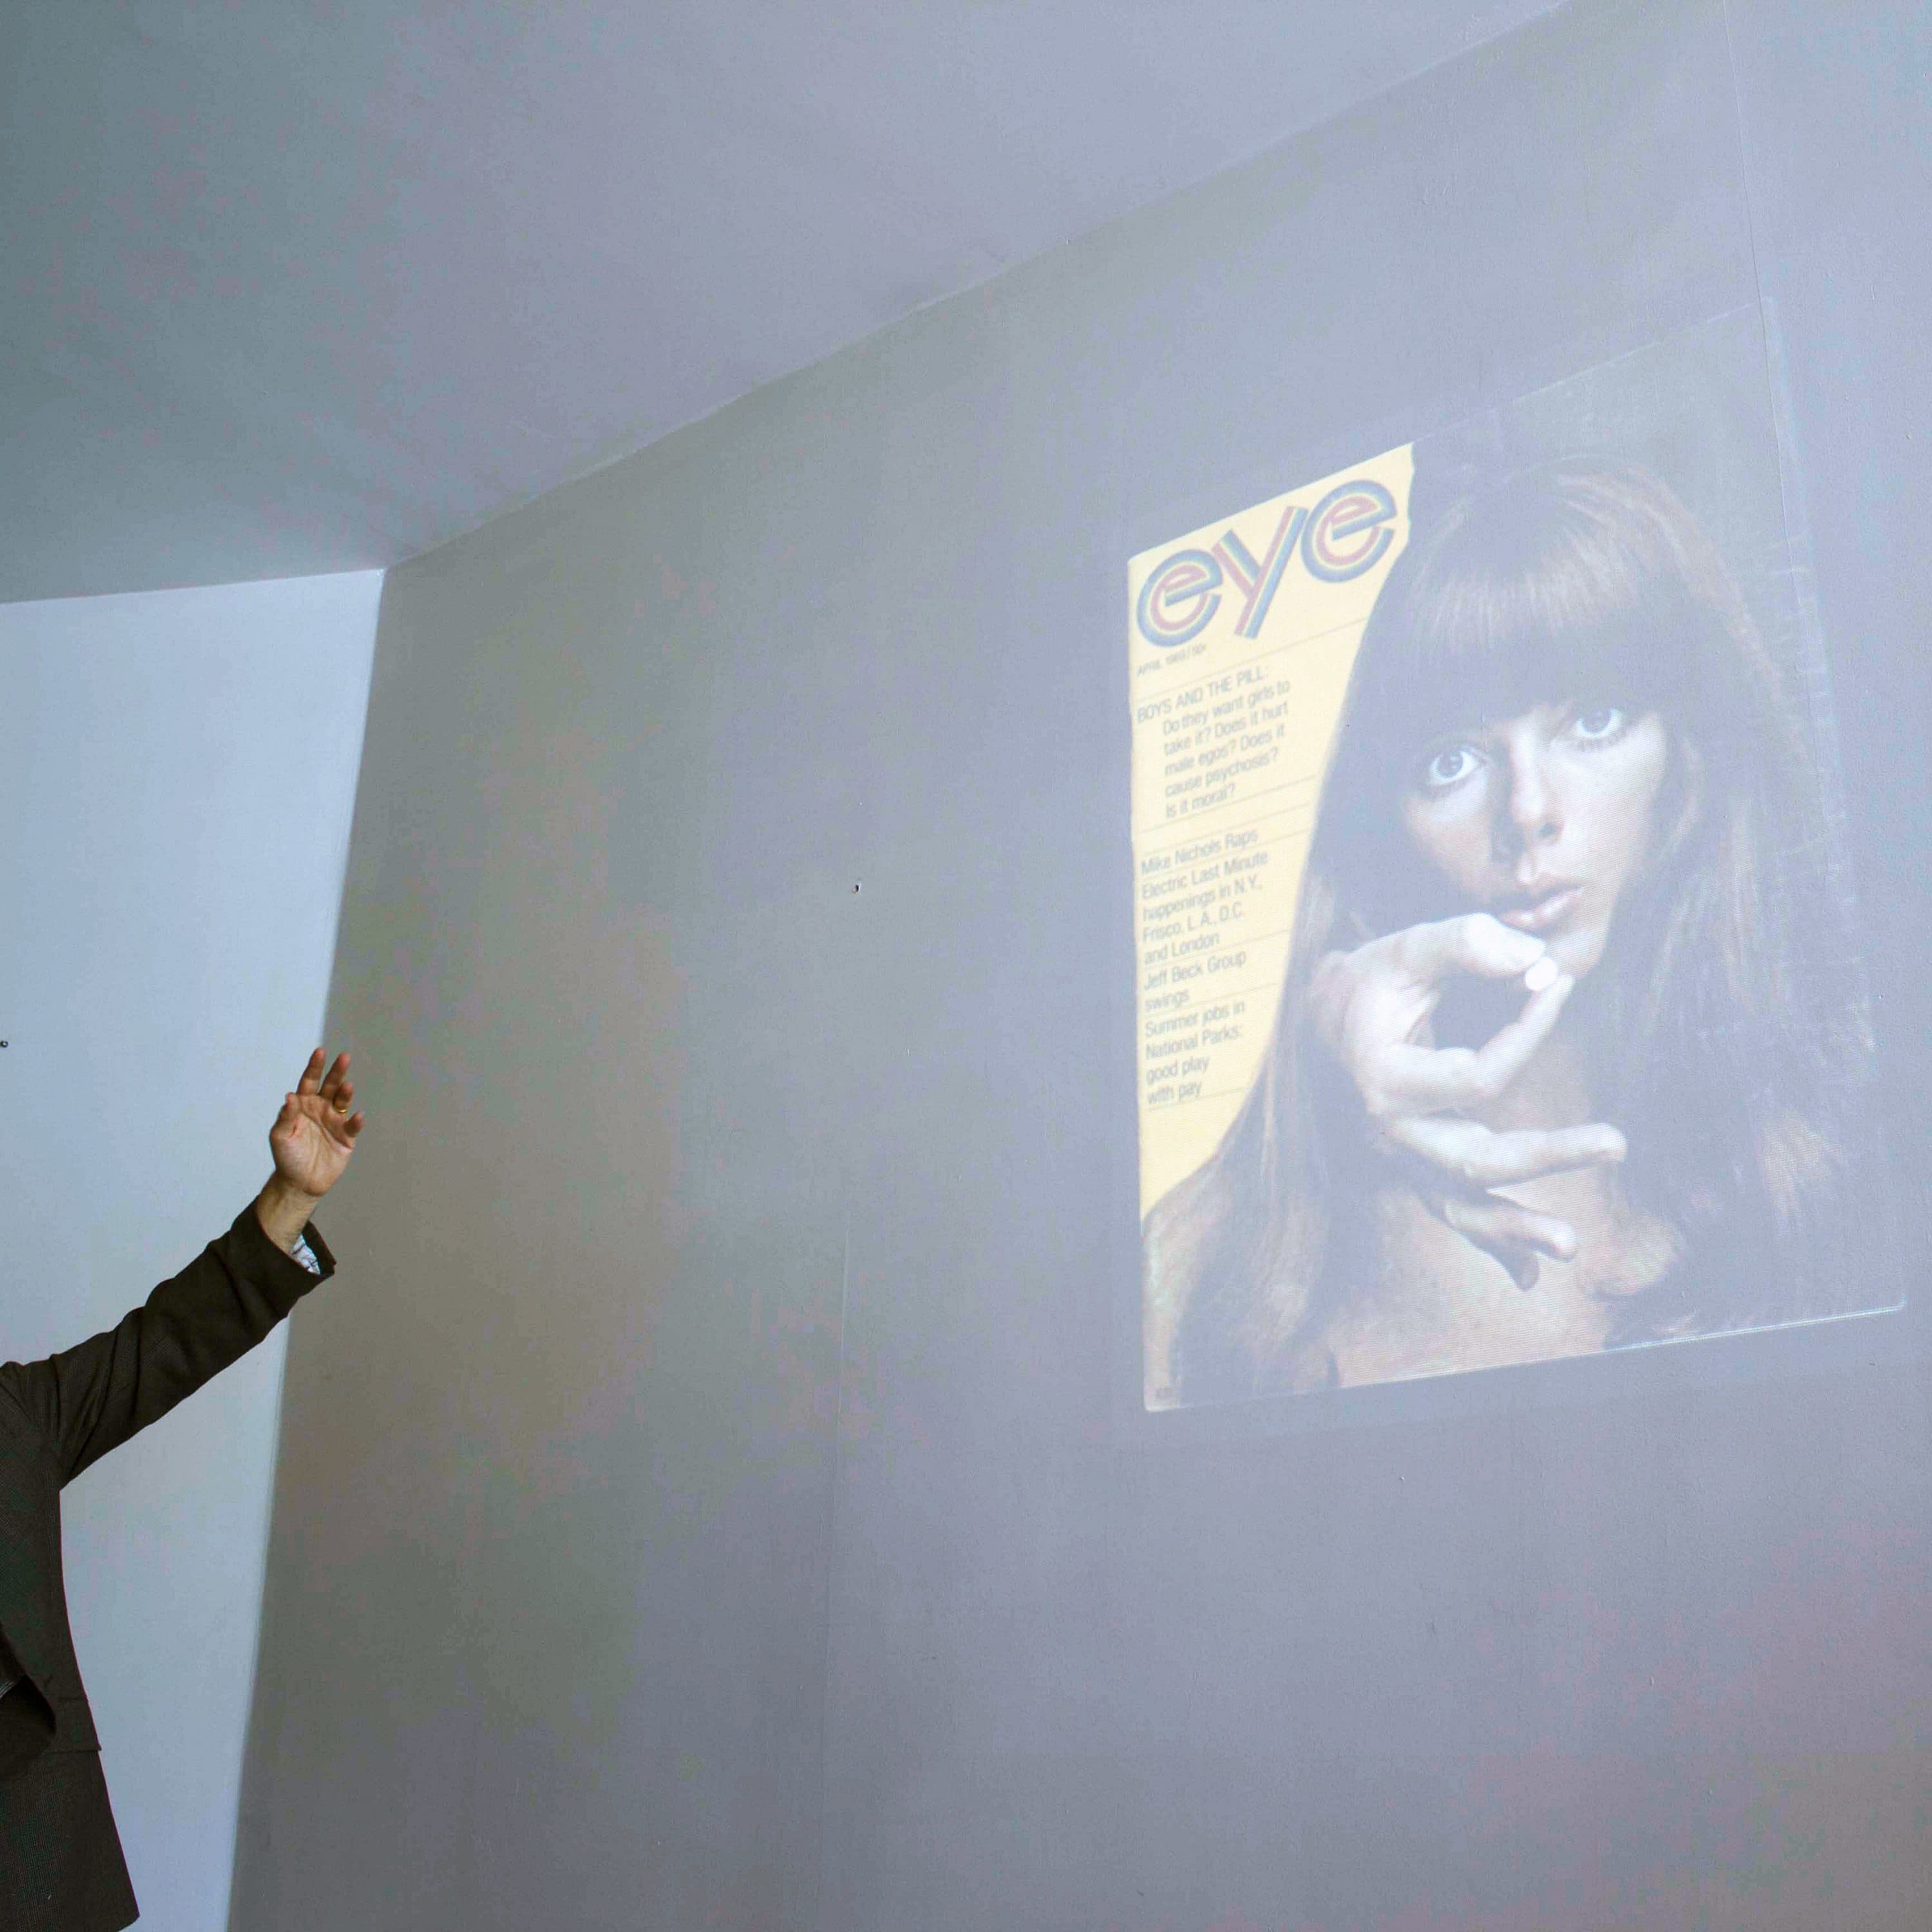 A man stands pointing towards a wall where an old magazine cover is projected. The magazine, titled "eye," features a woman with long hair holding a finger to her lips. The man holds a microphone and appears to be giving a presentation.